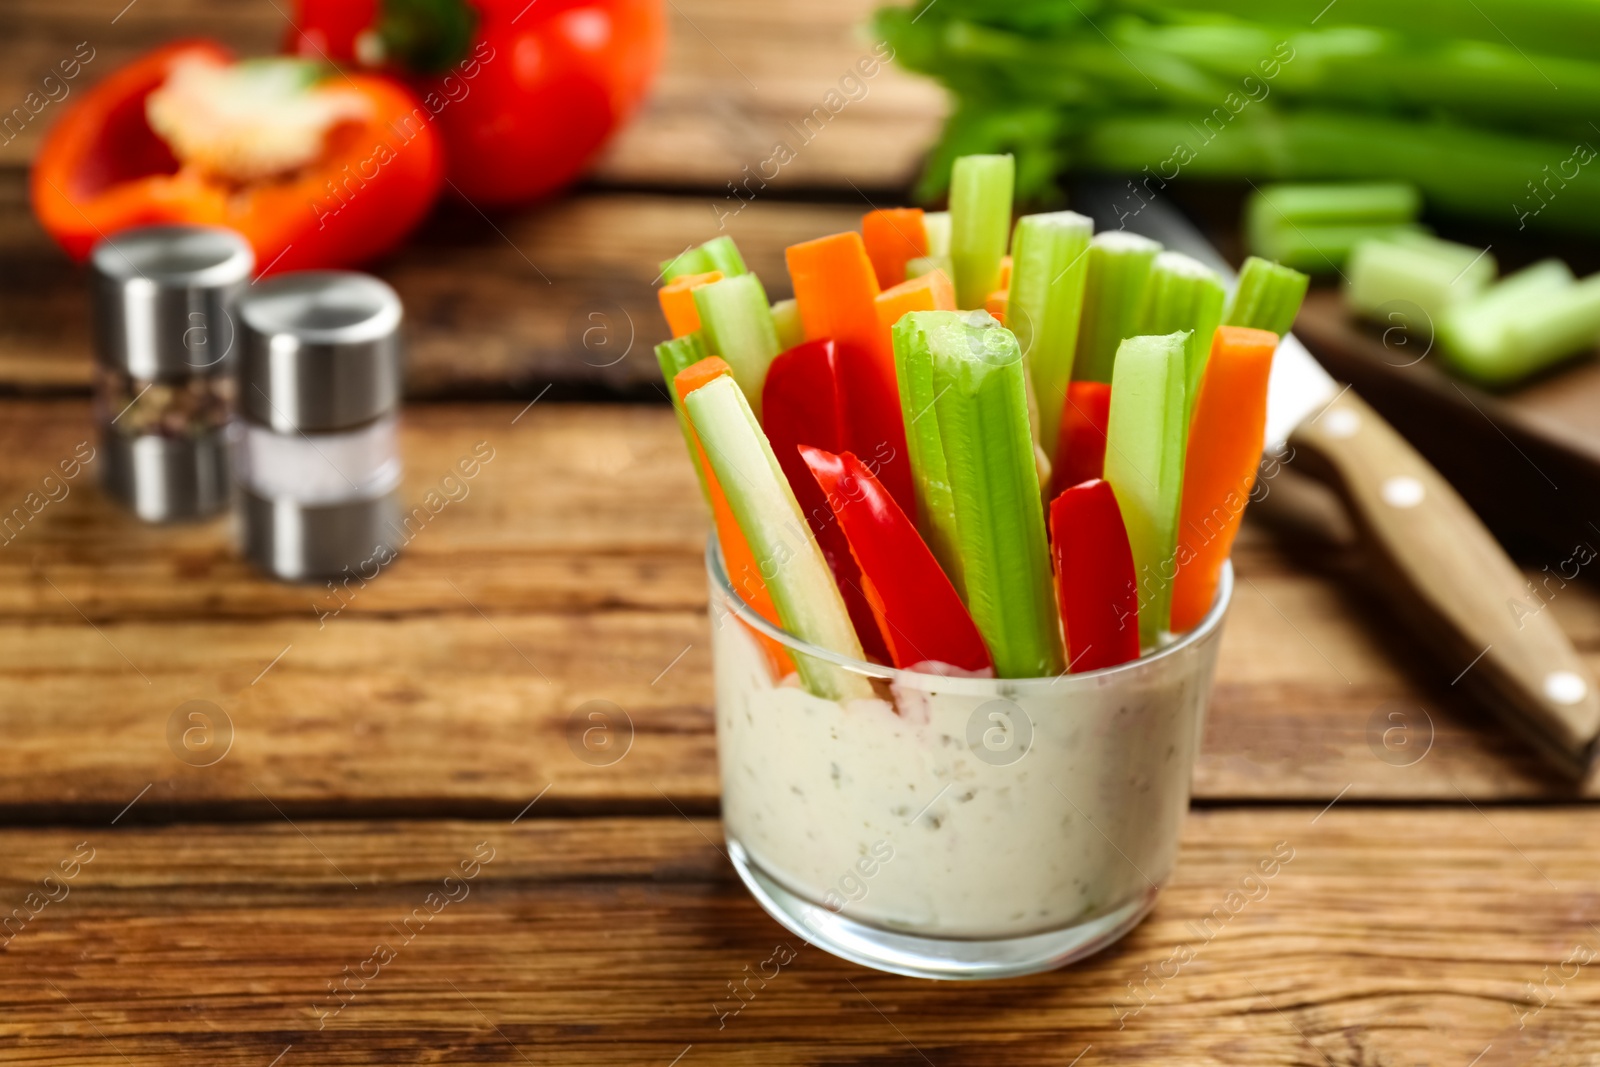 Photo of Celery and other vegetable sticks with dip sauce in glass bowl on wooden table